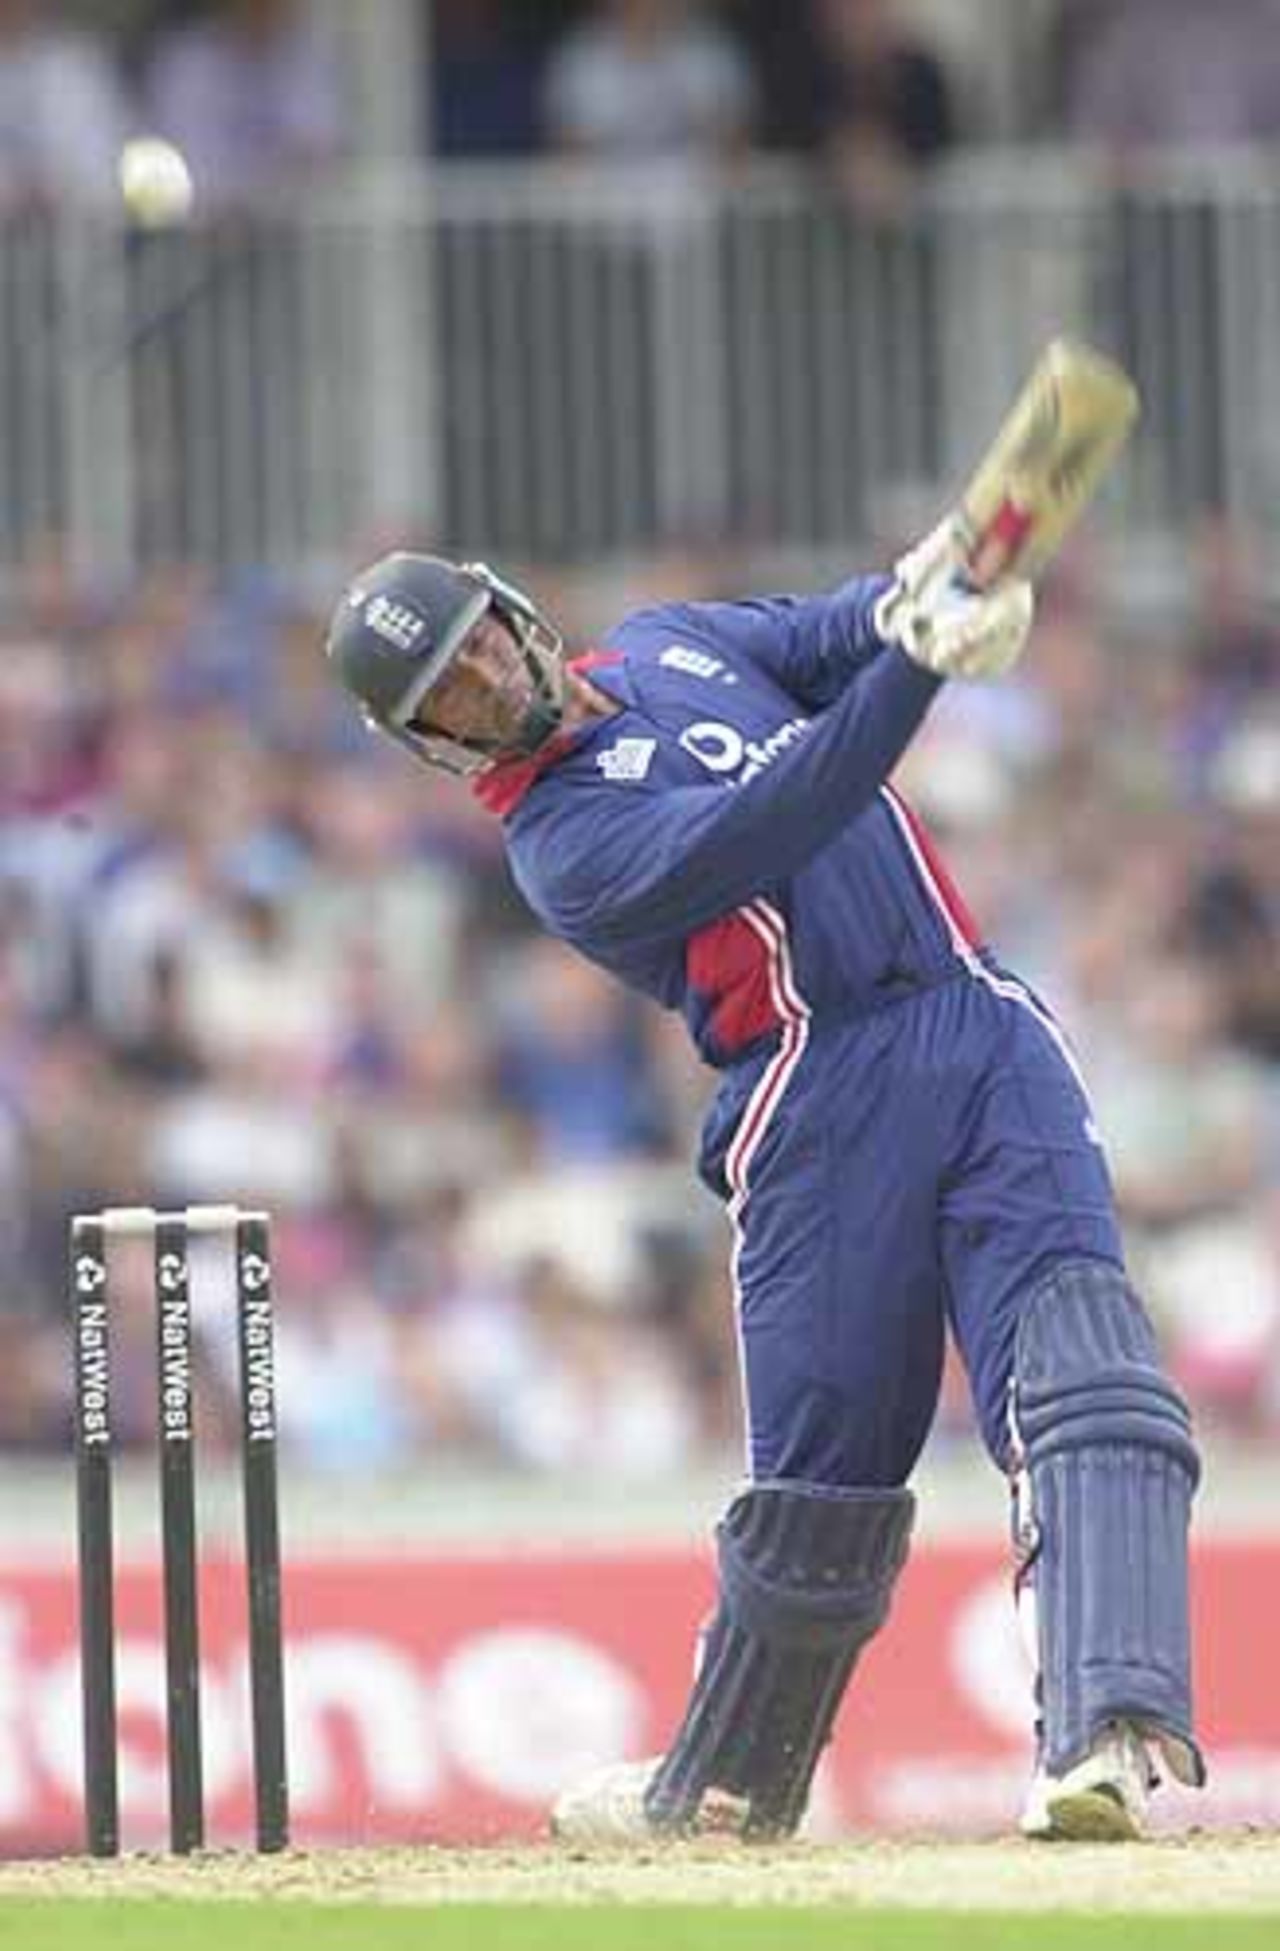 Over the top from England skipper Hussain, England v India at The Oval, July 2002